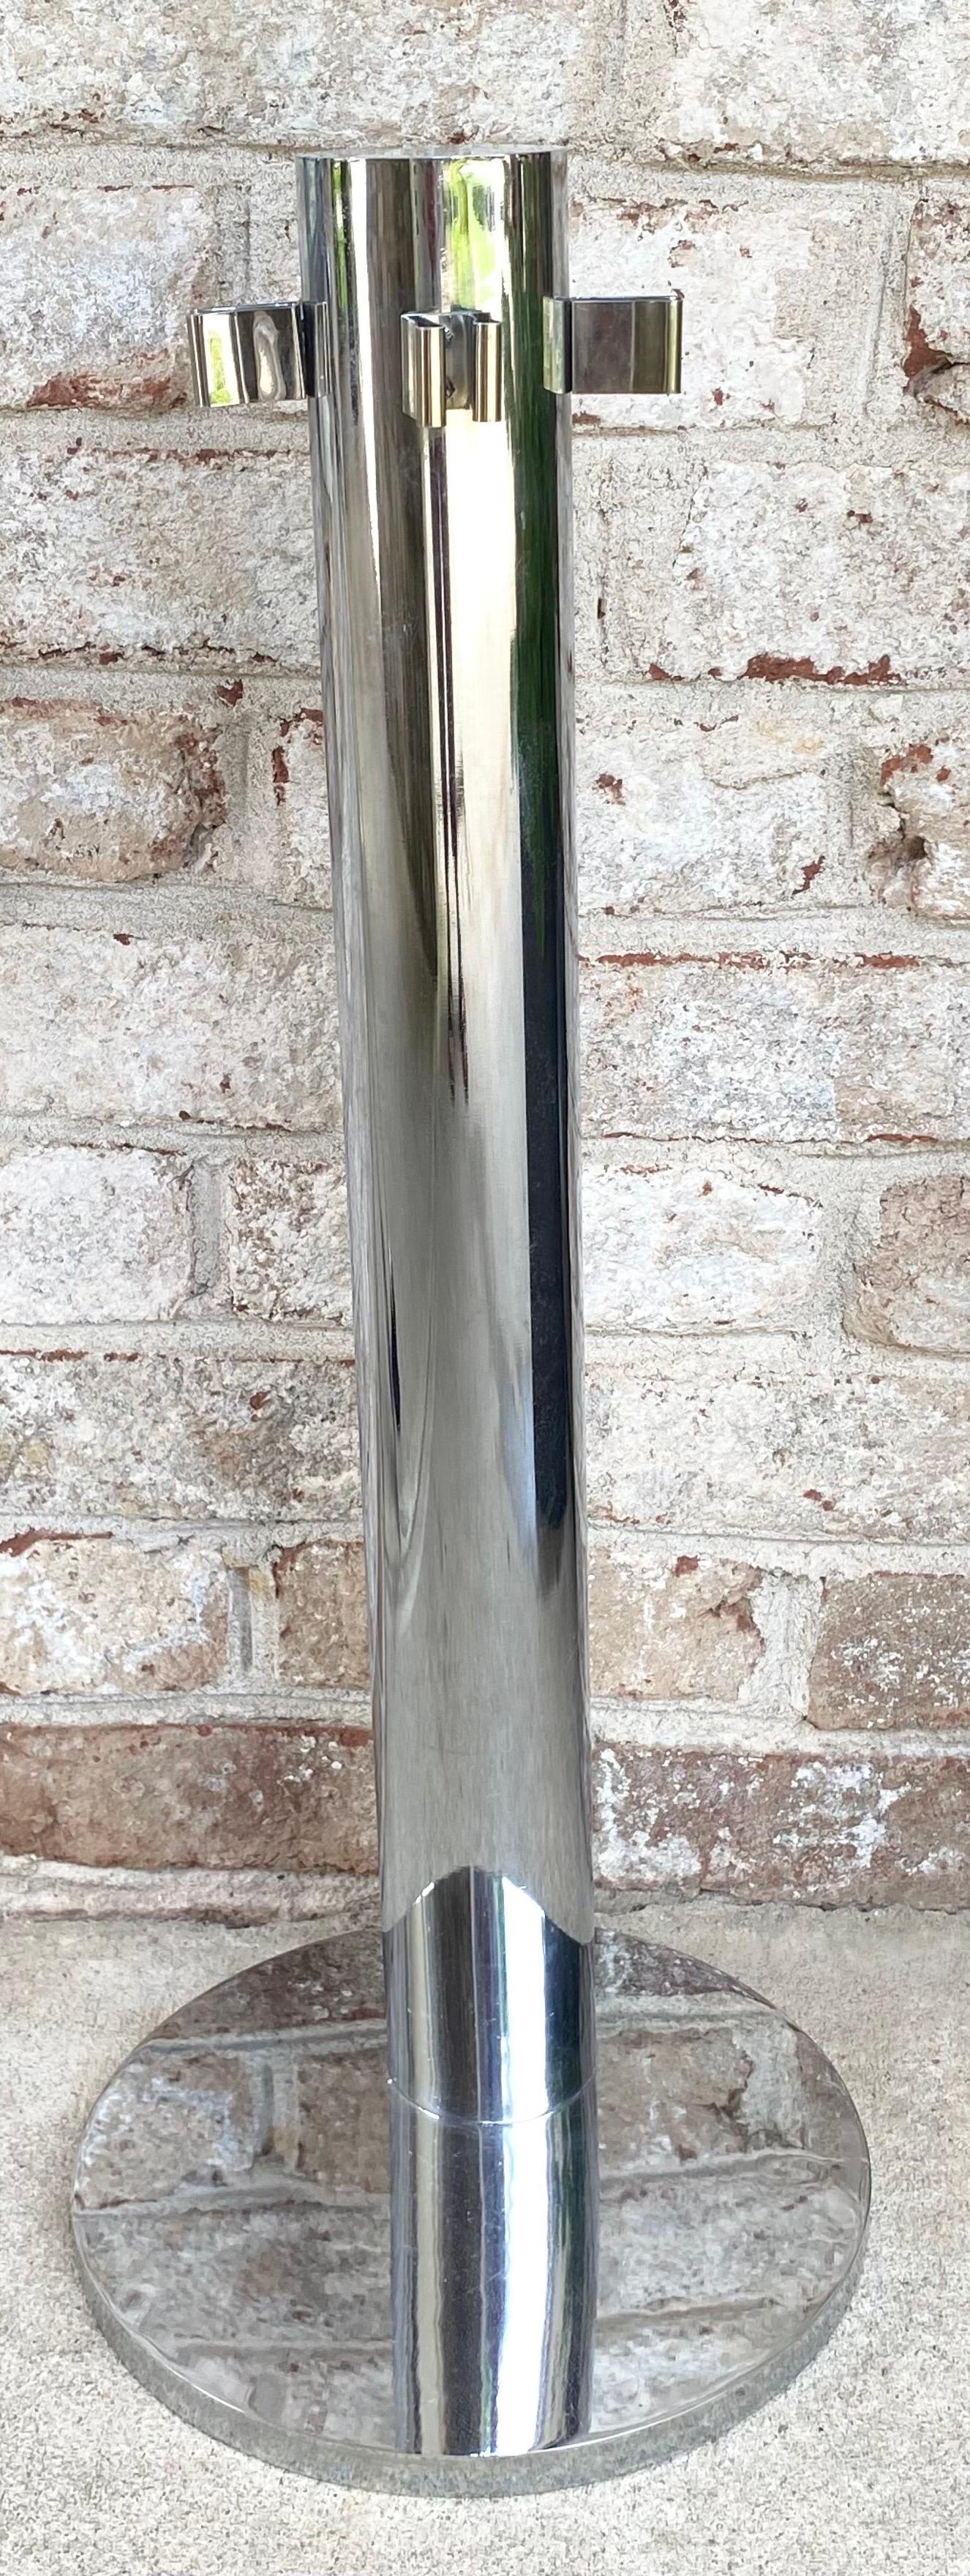 Modernist chrome fireplace tools with spring handles.

The measurements for the stand are 26.5